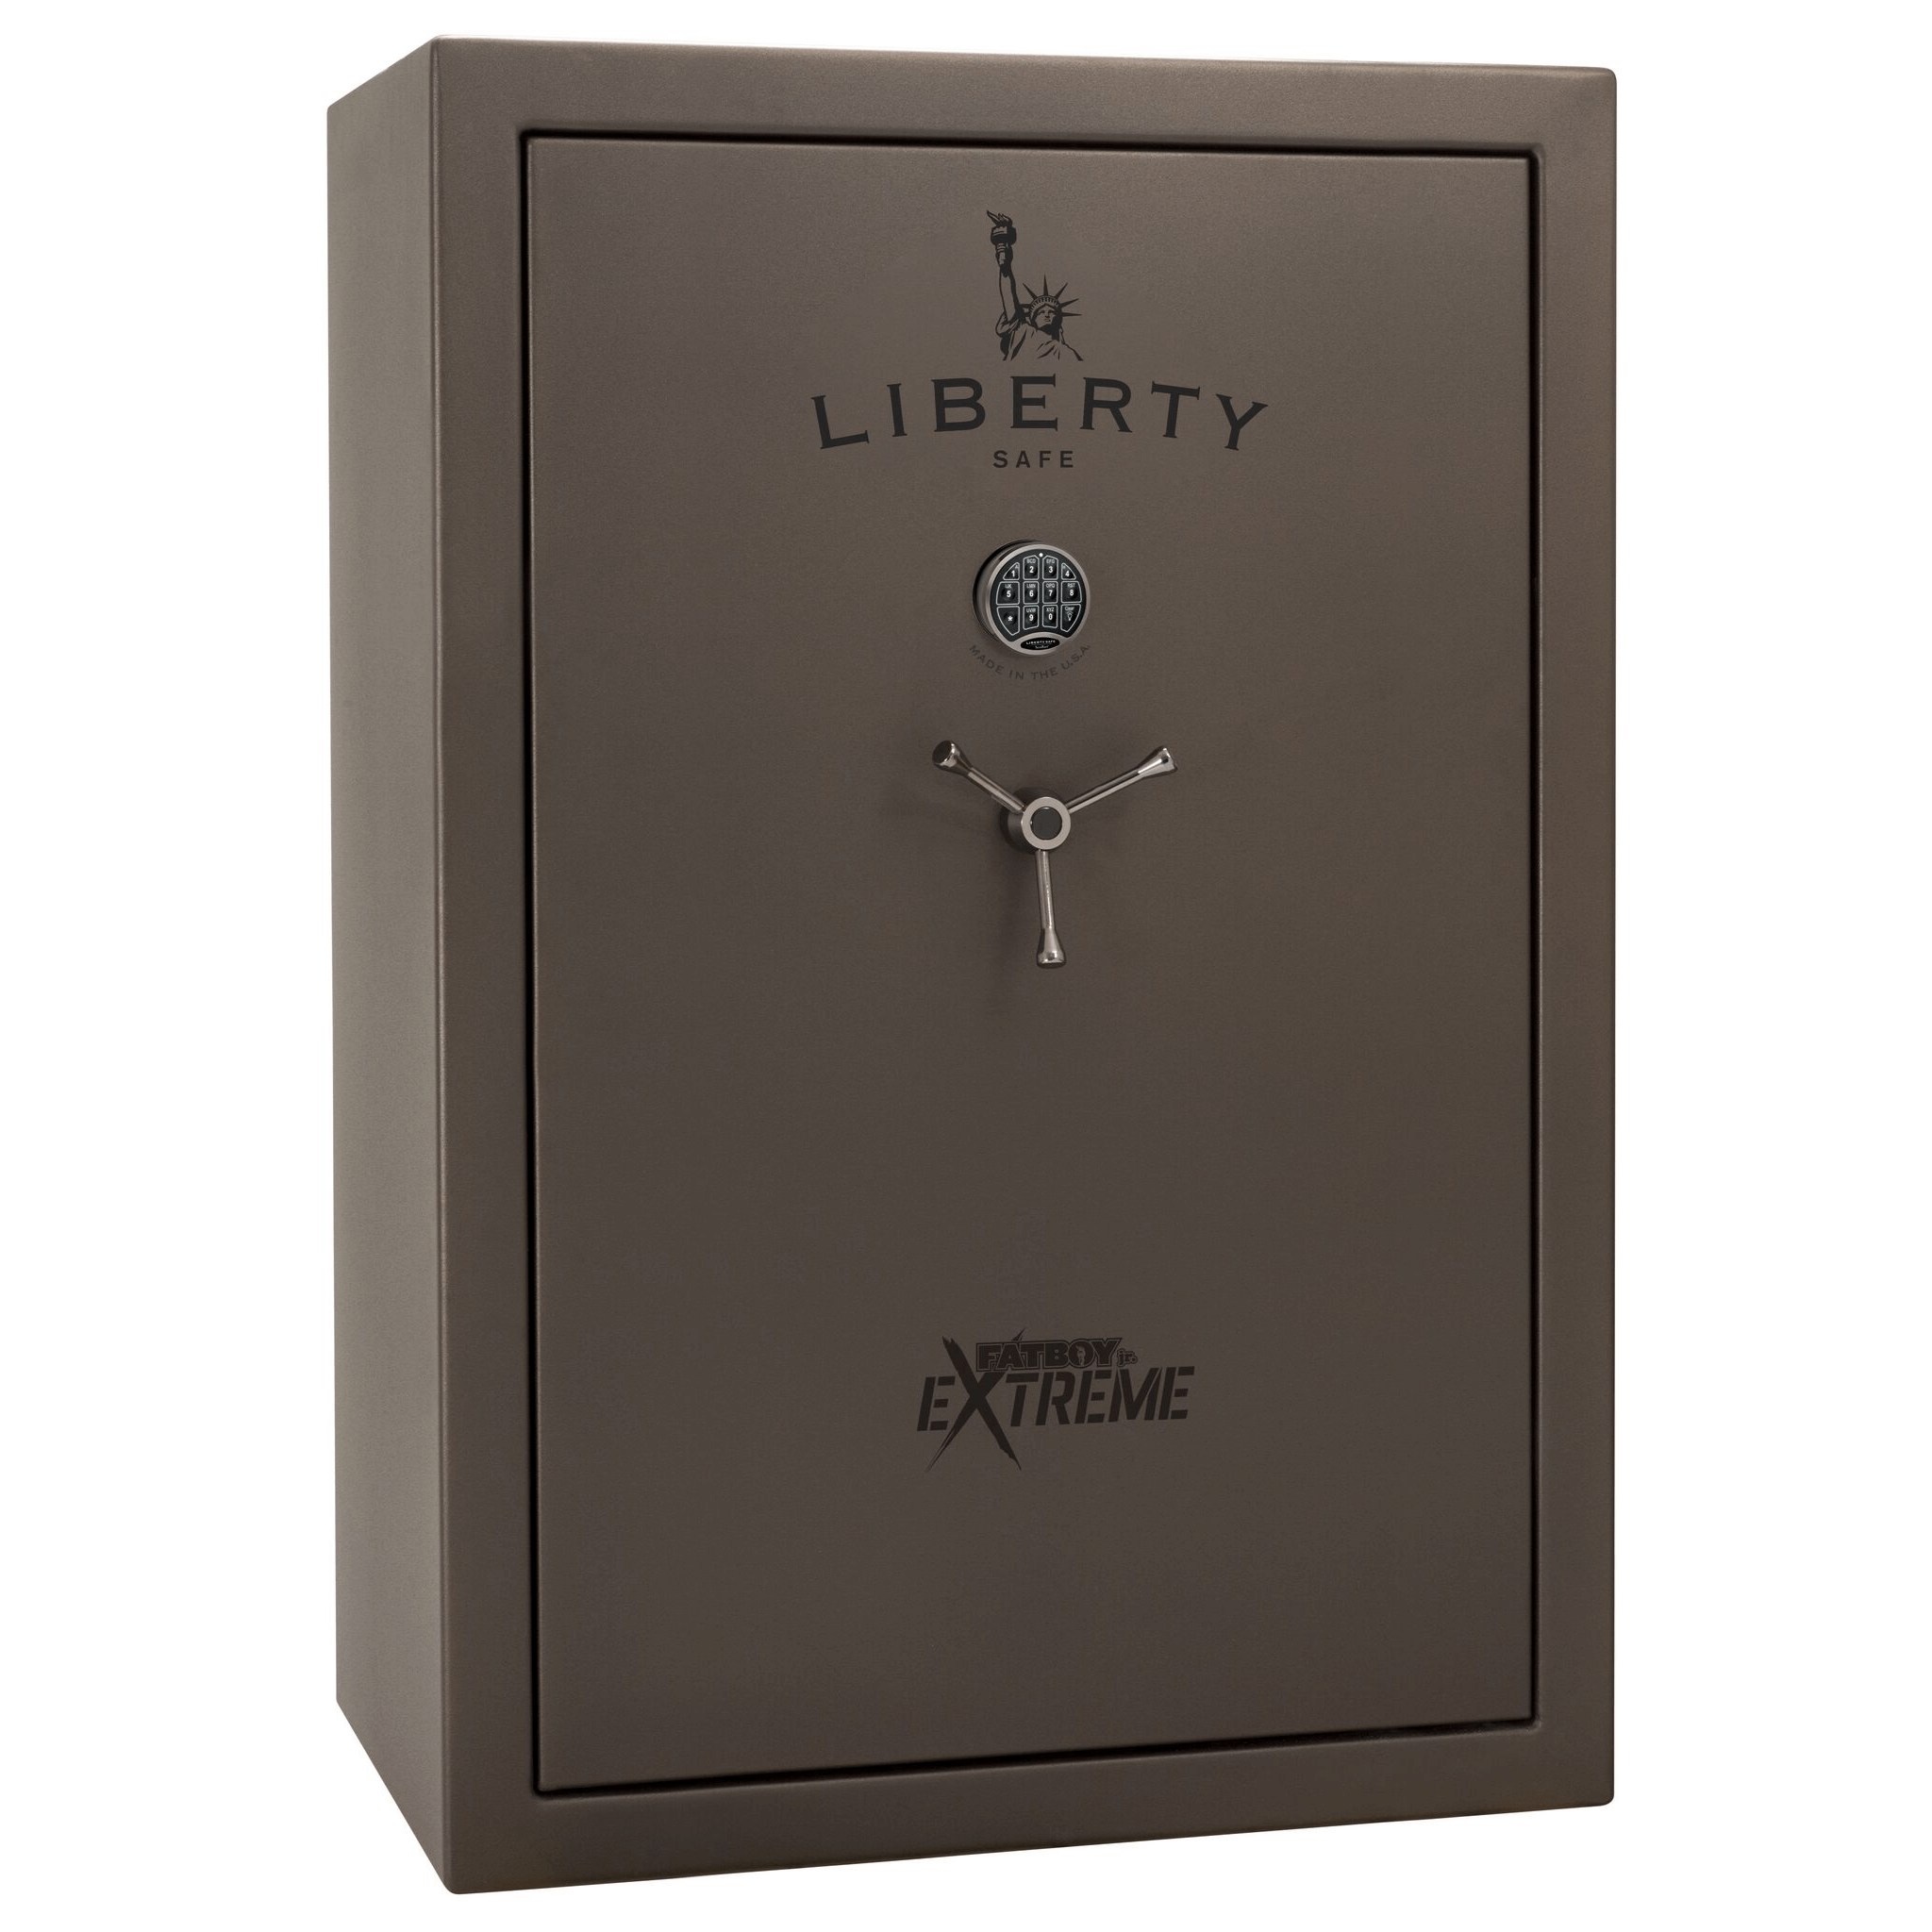 Fatboy Jr. Series | Level 3 Security | 75 Minute Fire Protection, photo 1